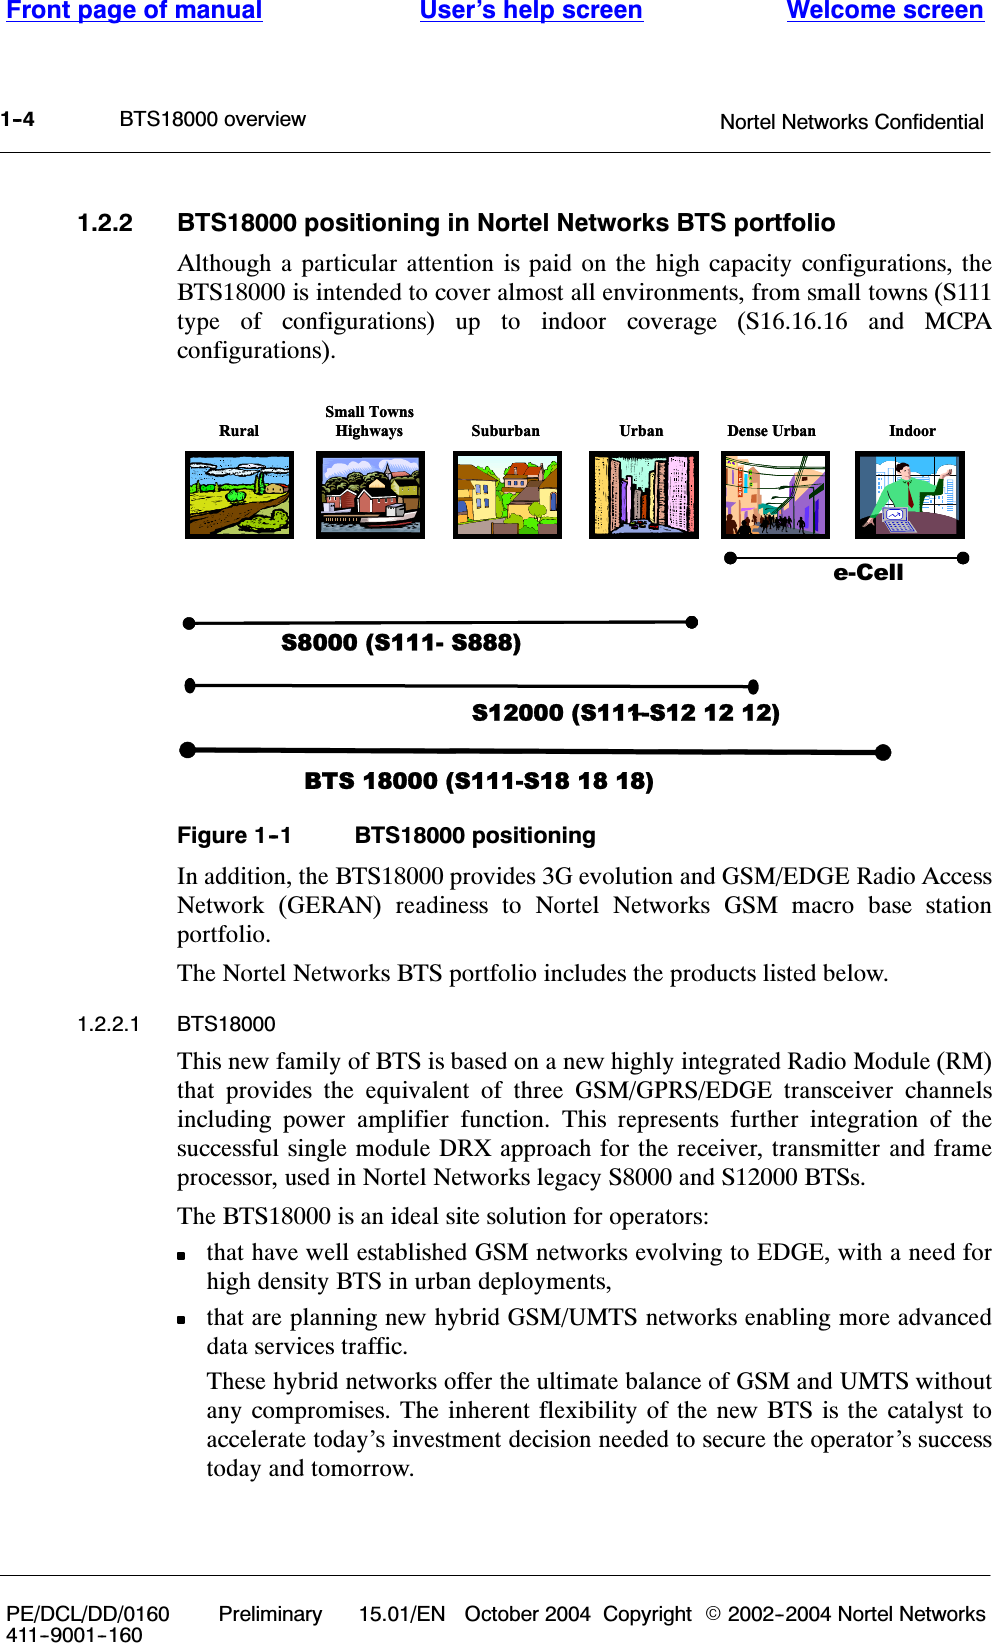 BTS18000 overviewFront page of manual Welcome screenUser’s help screenNortel Networks Confidential1--4PE/DCL/DD/0160411--9001--160Preliminary 15.01/EN October 2004 Copyright E2002--2004 Nortel Networks1.2.2 BTS18000 positioning in Nortel Networks BTS portfolioAlthough a particular attention is paid on the high capacity configurations, theBTS18000 is intended to cover almost all environments, from small towns (S111type of configurations) up to indoor coverage (S16.16.16 and MCPAconfigurations).e-CellS12000 (S111-S12 12 12)–RuralSmall TownsHighways Suburban IndoorUrban Dense UrbanS8000 (S111- S888) BTS 18000 (S111-S18 18 18)–RuralSmall TownsHighways Suburban IndoorUrban Dense UrbanFigure 1--1 BTS18000 positioningIn addition, the BTS18000 provides 3G evolution and GSM/EDGE Radio AccessNetwork (GERAN) readiness to Nortel Networks GSM macro base stationportfolio.The Nortel Networks BTS portfolio includes the products listed below.1.2.2.1 BTS18000This new family of BTS is based on a new highly integrated Radio Module (RM)that provides the equivalent of three GSM/GPRS/EDGE transceiver channelsincluding power amplifier function. This represents further integration of thesuccessful single module DRX approach for the receiver, transmitter and frameprocessor, used in Nortel Networks legacy S8000 and S12000 BTSs.The BTS18000 is an ideal site solution for operators:that have well established GSM networks evolving to EDGE, with a need forhigh density BTS in urban deployments,that are planning new hybrid GSM/UMTS networks enabling more advanceddata services traffic.These hybrid networks offer the ultimate balance of GSM and UMTS withoutany compromises. The inherent flexibility of the new BTS is the catalyst toaccelerate today’s investment decision needed to secure the operator’s successtoday and tomorrow.